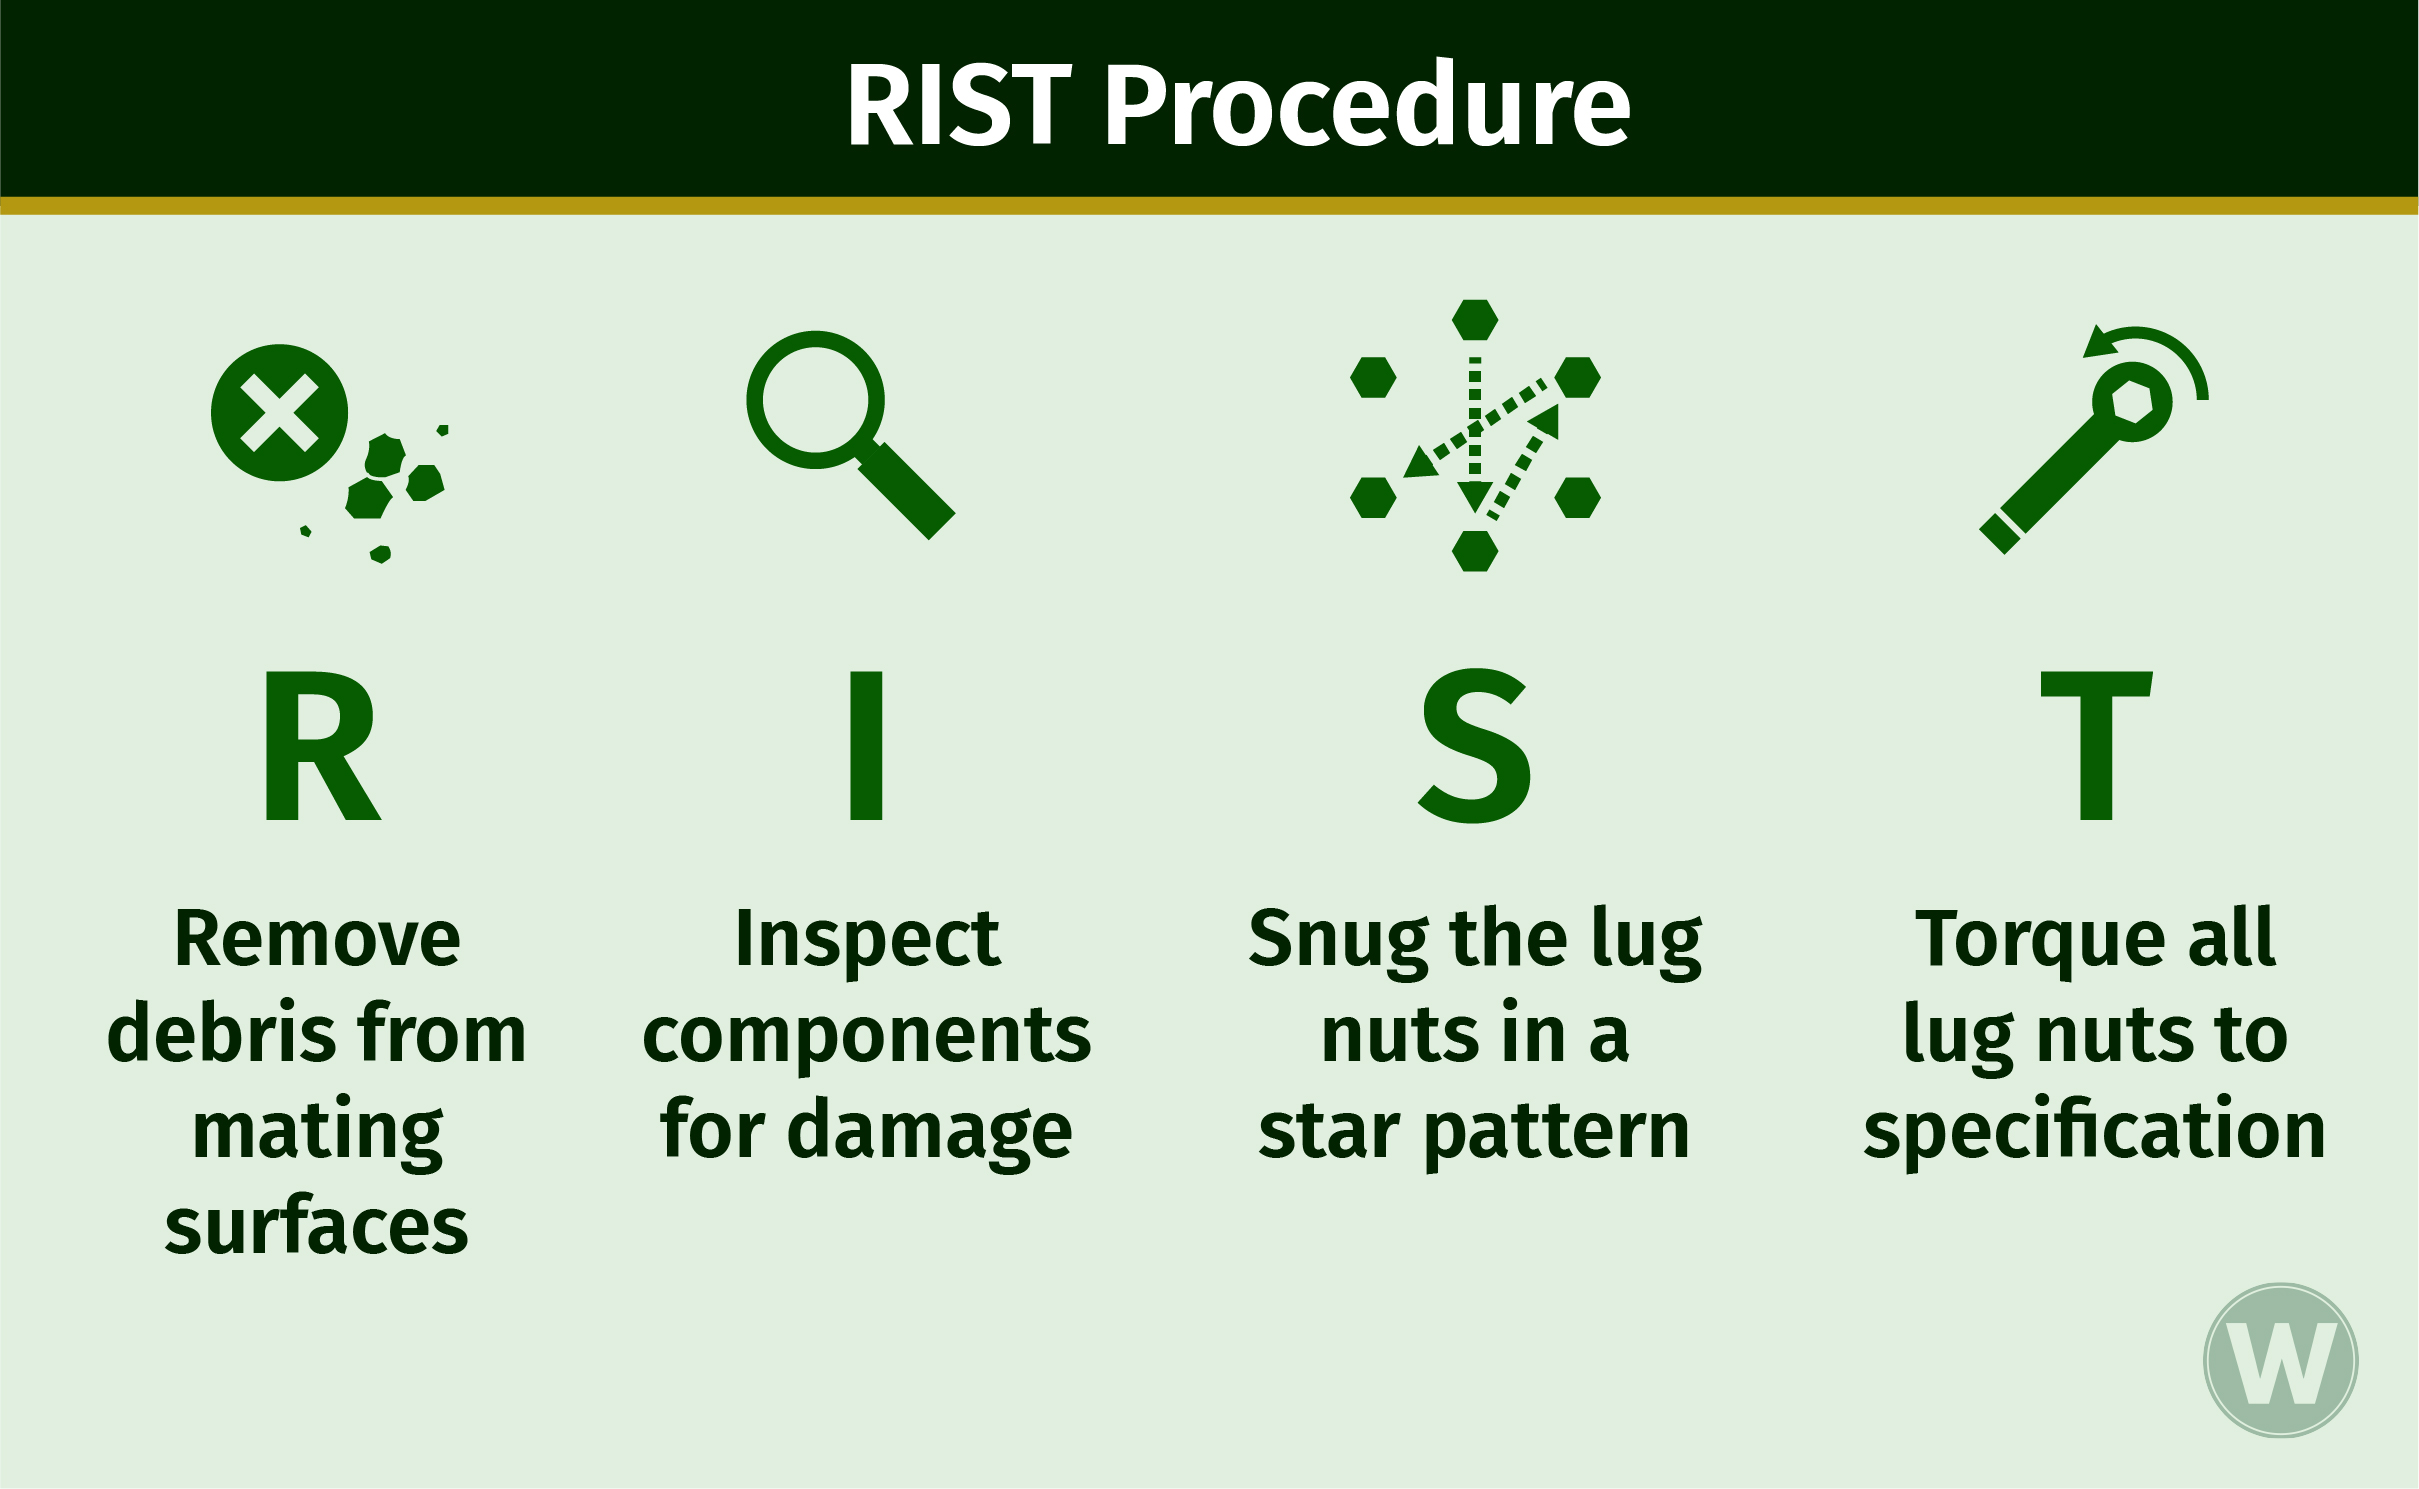 The RIST acronym stands for as follows. R: Remove Debris from mating surfaces. I: Inspect components for damage. S: Snug the lug nuts in a star pattern. T: Torque all lug nuts to specification.